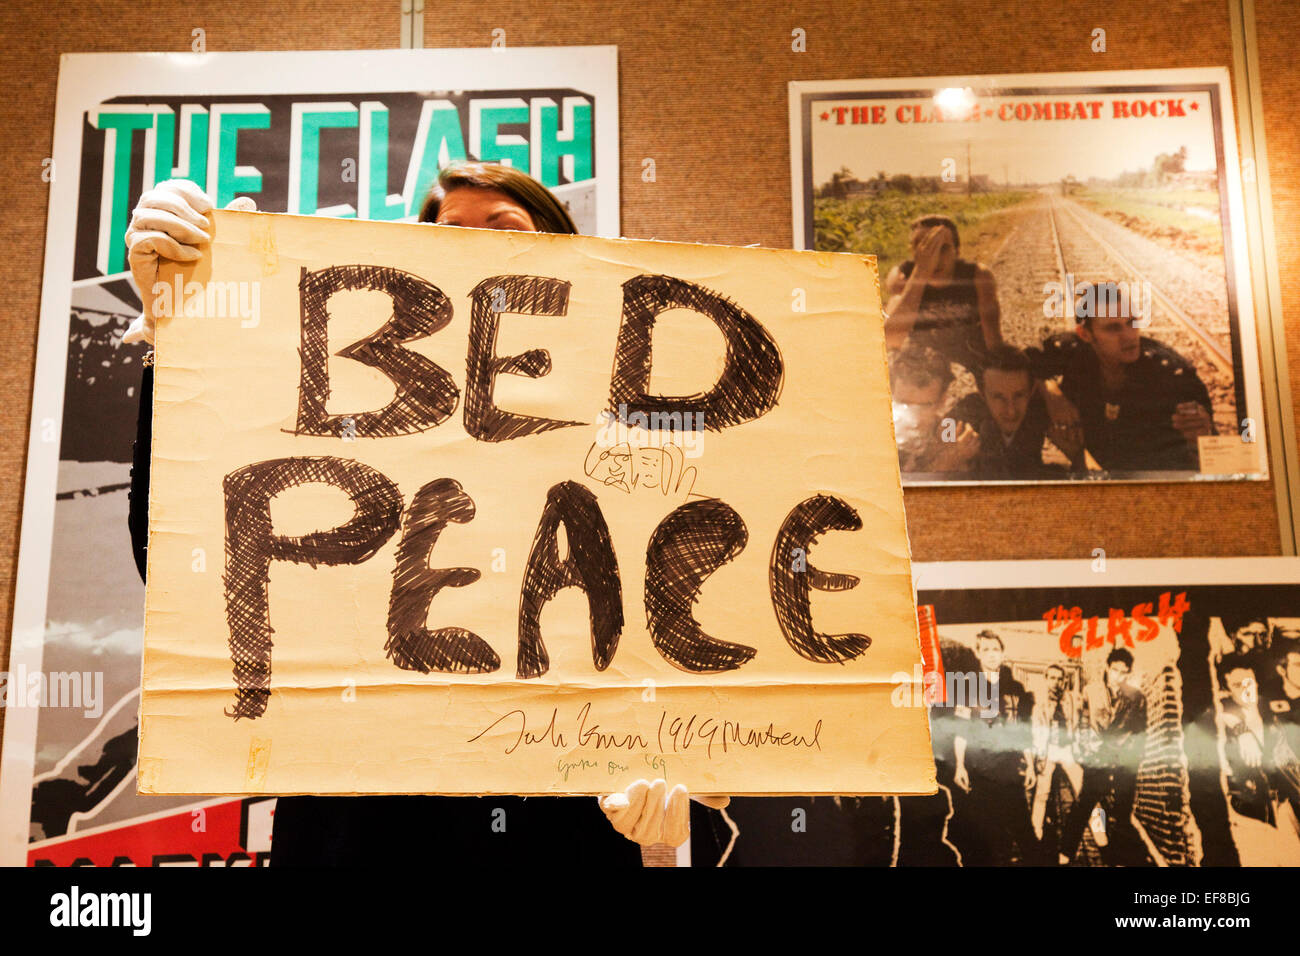 Bed Peace" poster by John Lennon from his Bed-In for Peace in Montreal 1969  is estimated to fetch £80,000-100,000. Pop Culture: Rock and Pop  Memorabilia sale at Christie's in South Kensington on